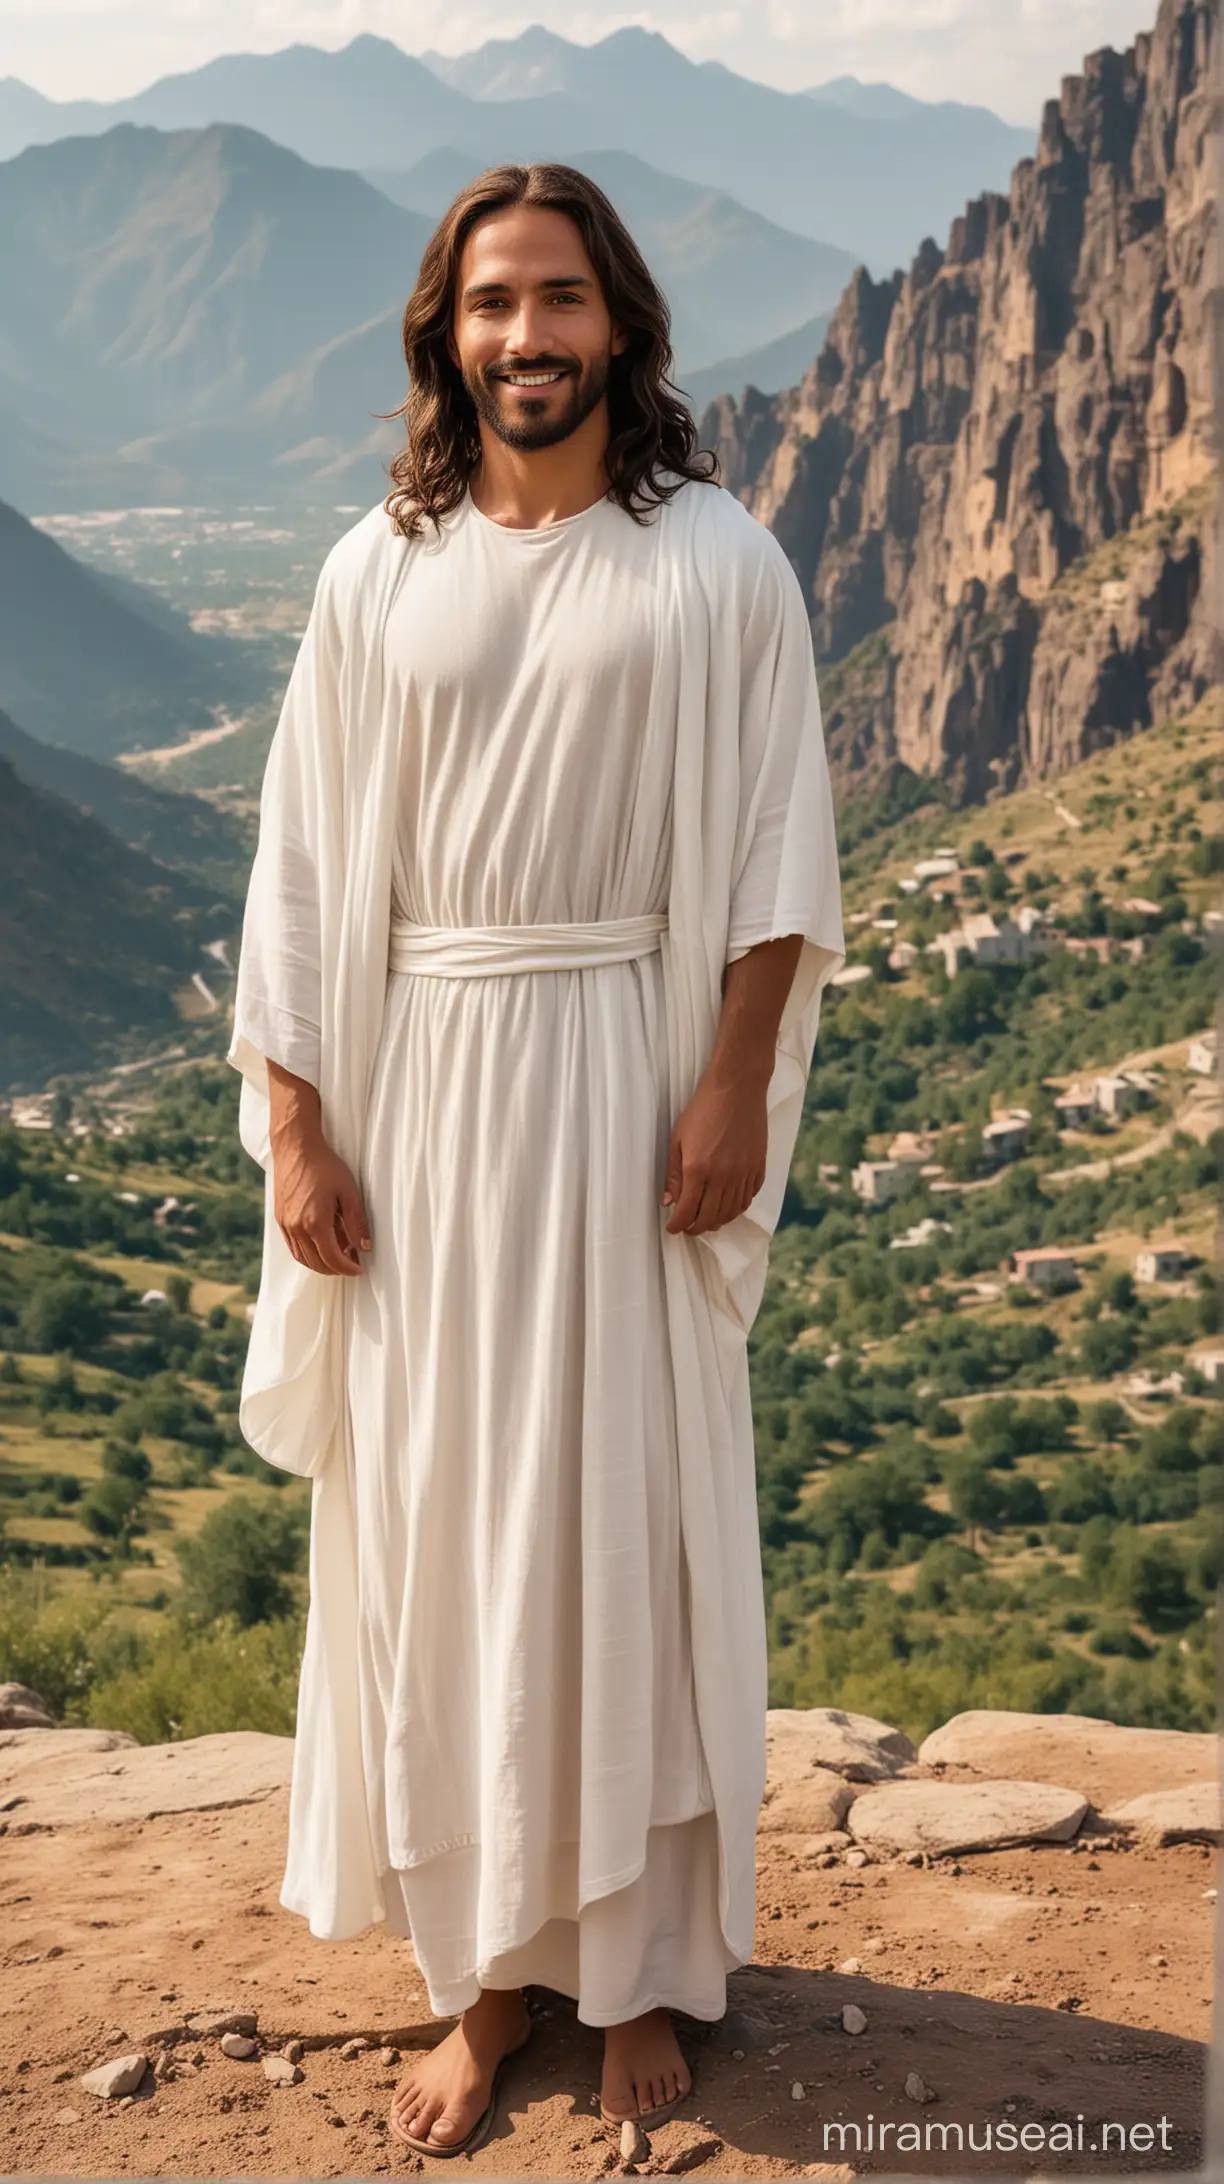 Savior on a Summit Jesus in White with a Serene Smile